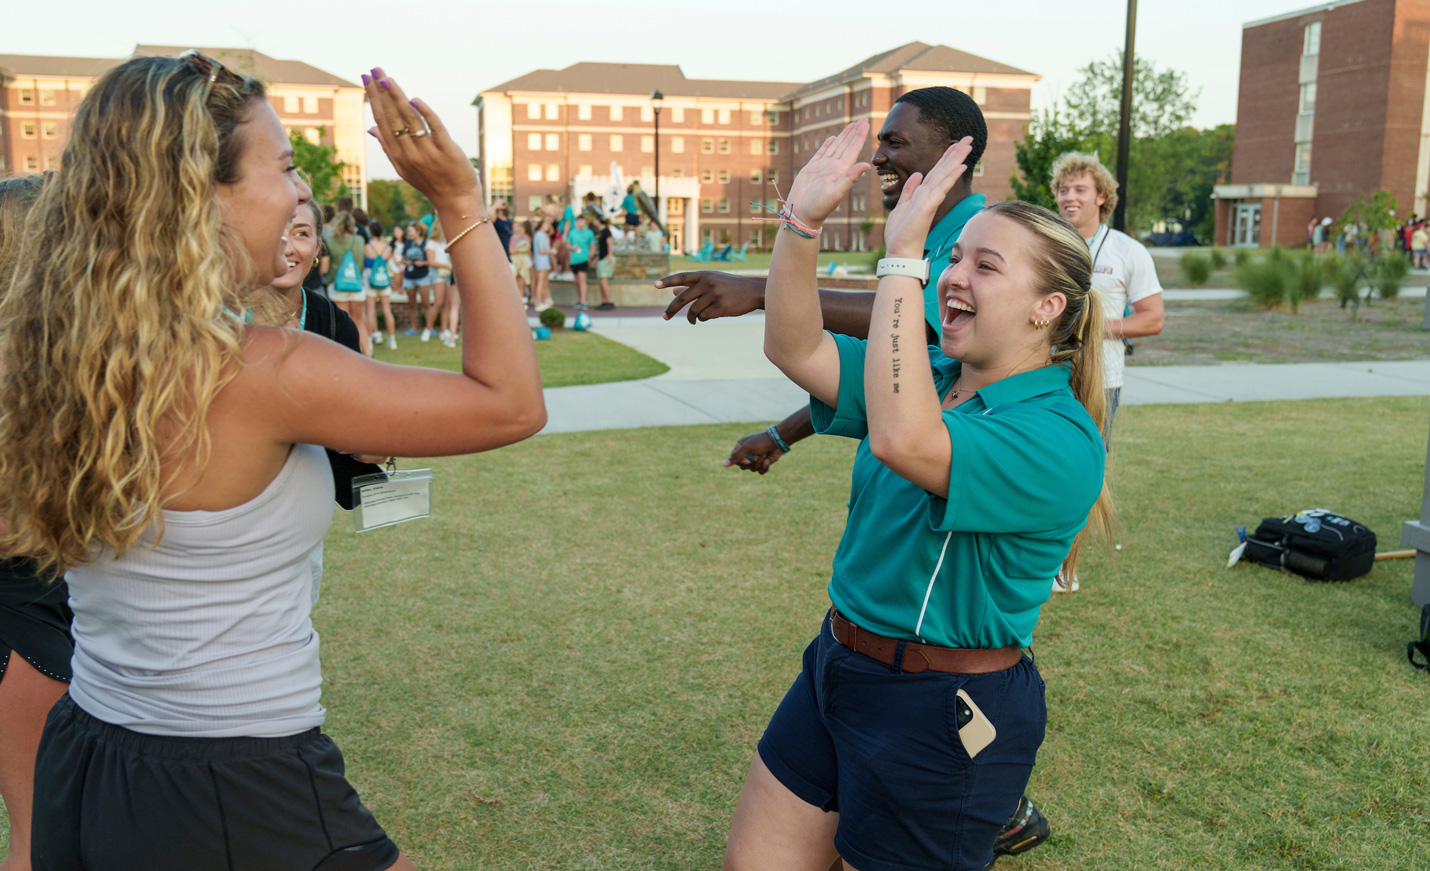 Students high-fiving at orientation